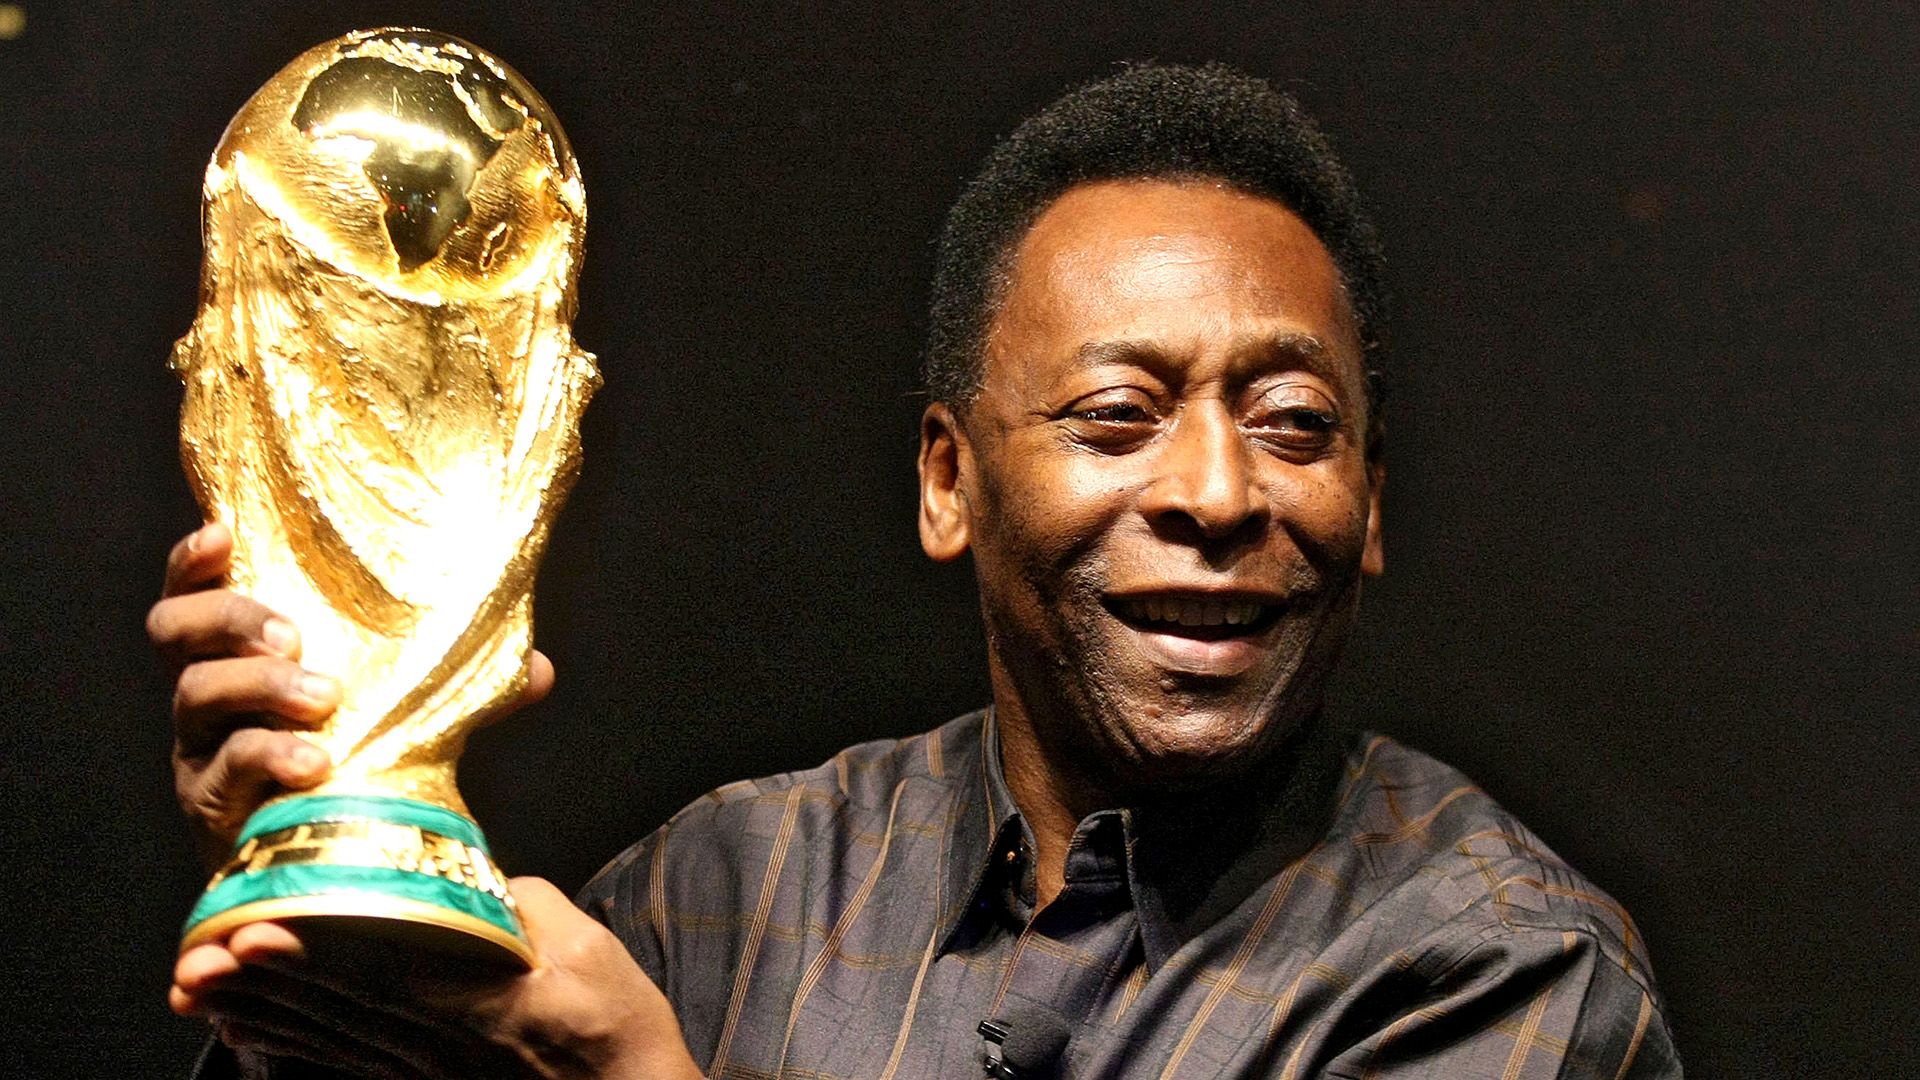 Pelé, who is battling cancer, addresses his fans after Brazil's defeat at the 2022 World Cup